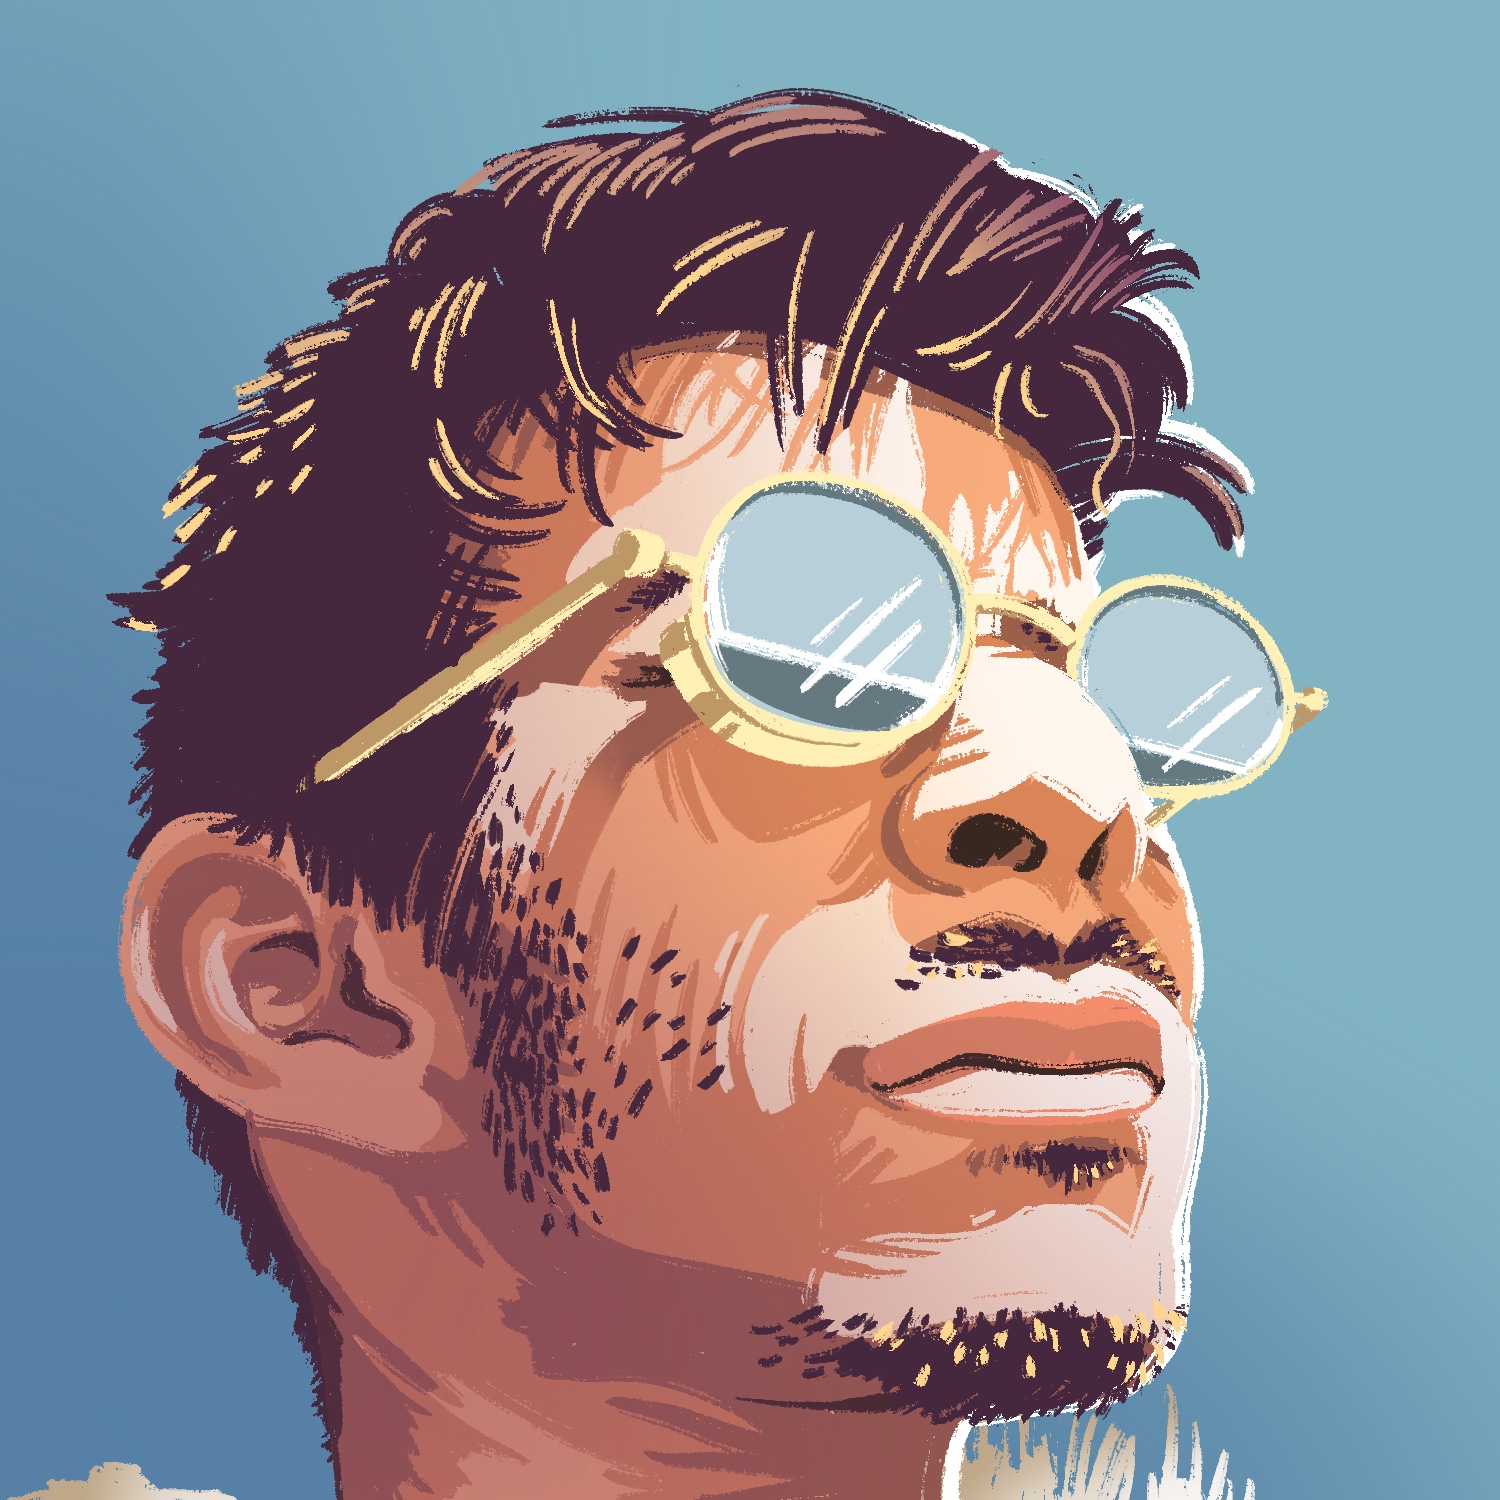 An illustration of a man wearing sunglasses and looking out into the distance. The man has a medium complexion and dark hair. He has a light mustache, goatee, and stubble. His face is lit brightly from the front, and the view of the image is from slightly below him.